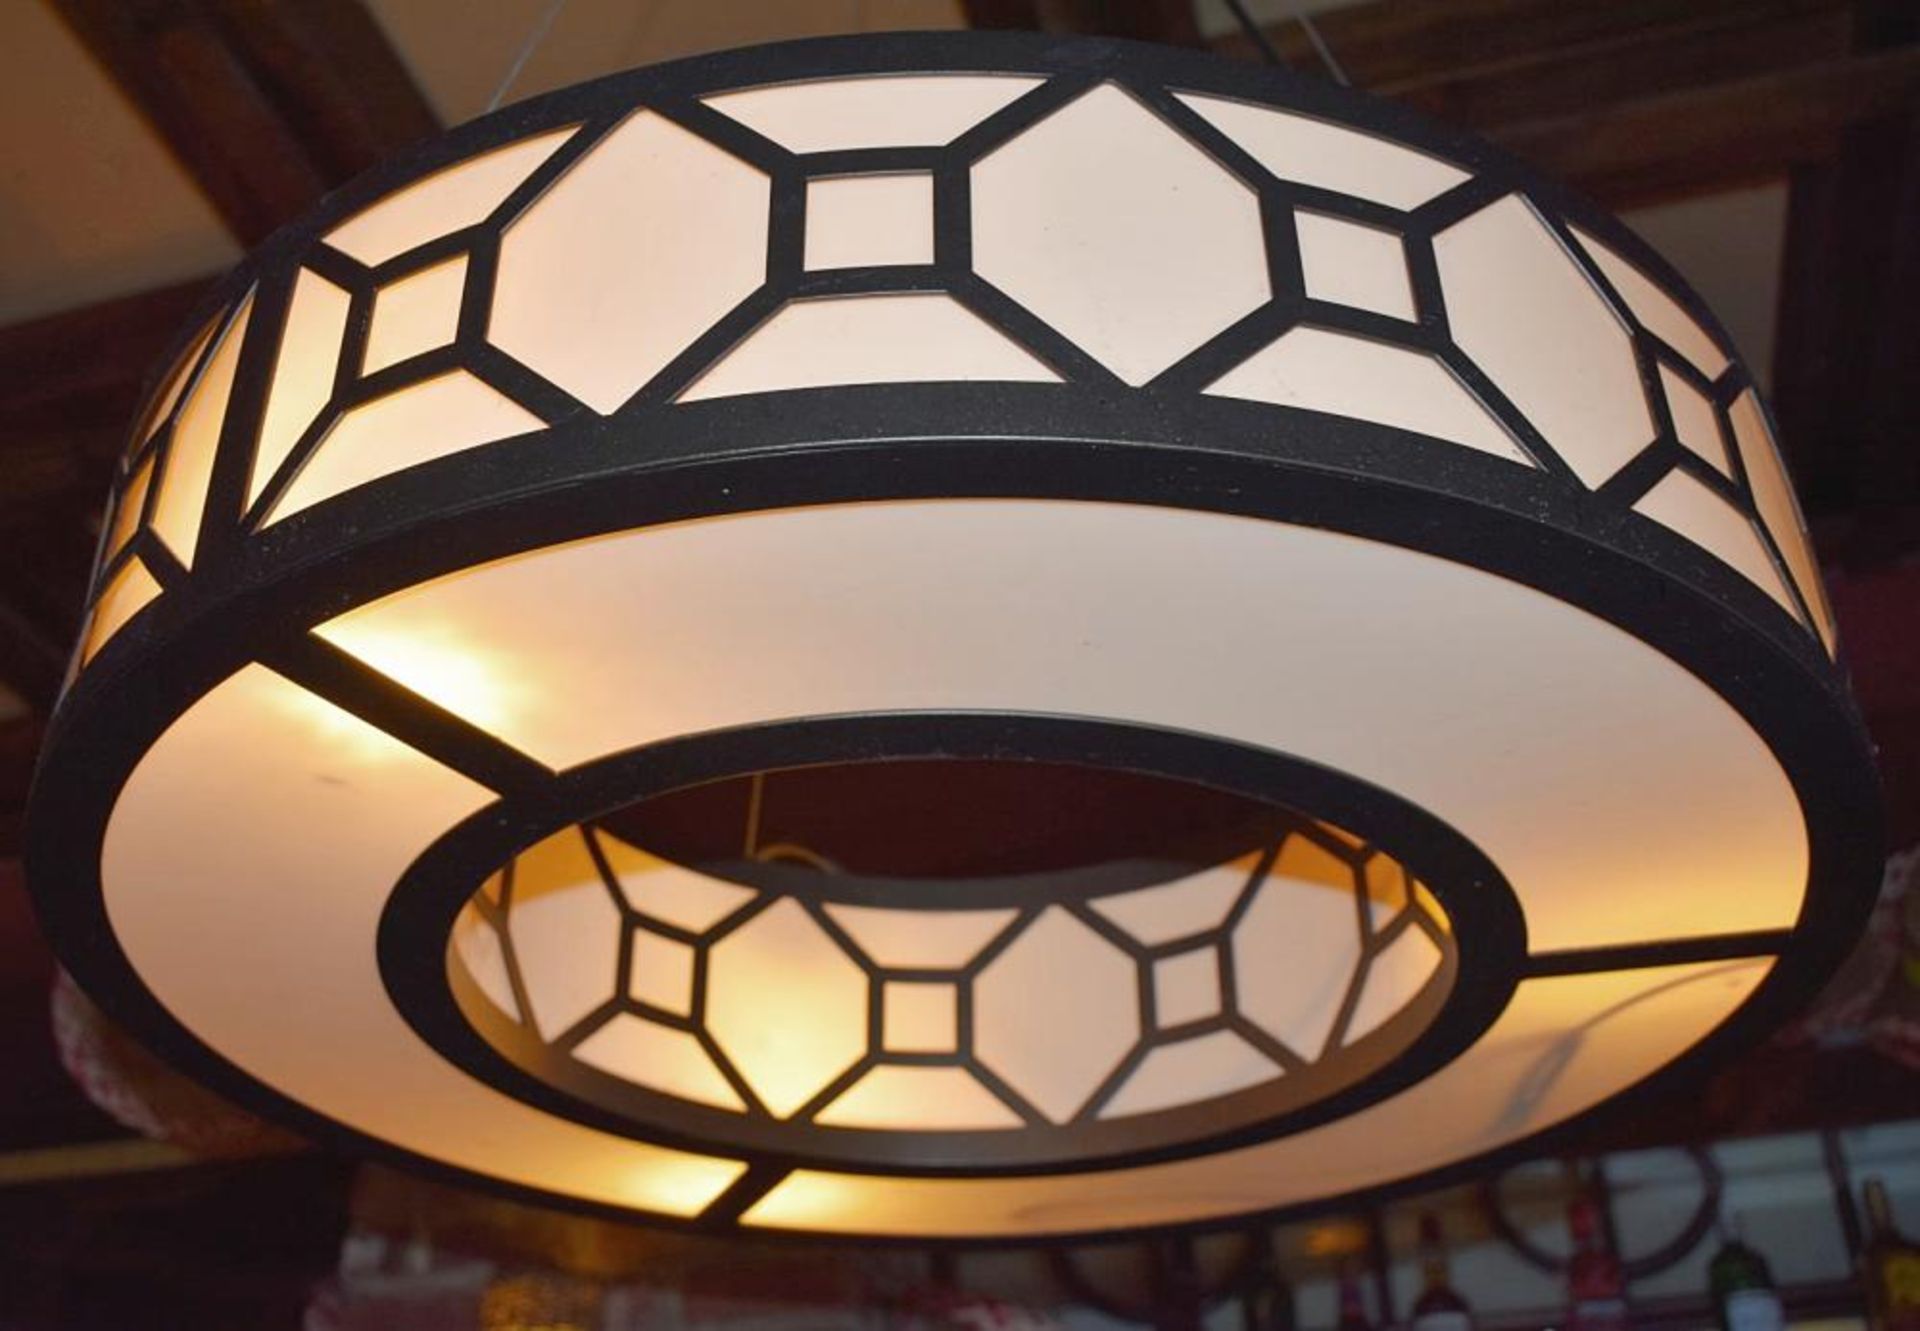 1 x Large Round Suspended Commercial Ceiling Light Fitting Featuring A Leaded Glass Style